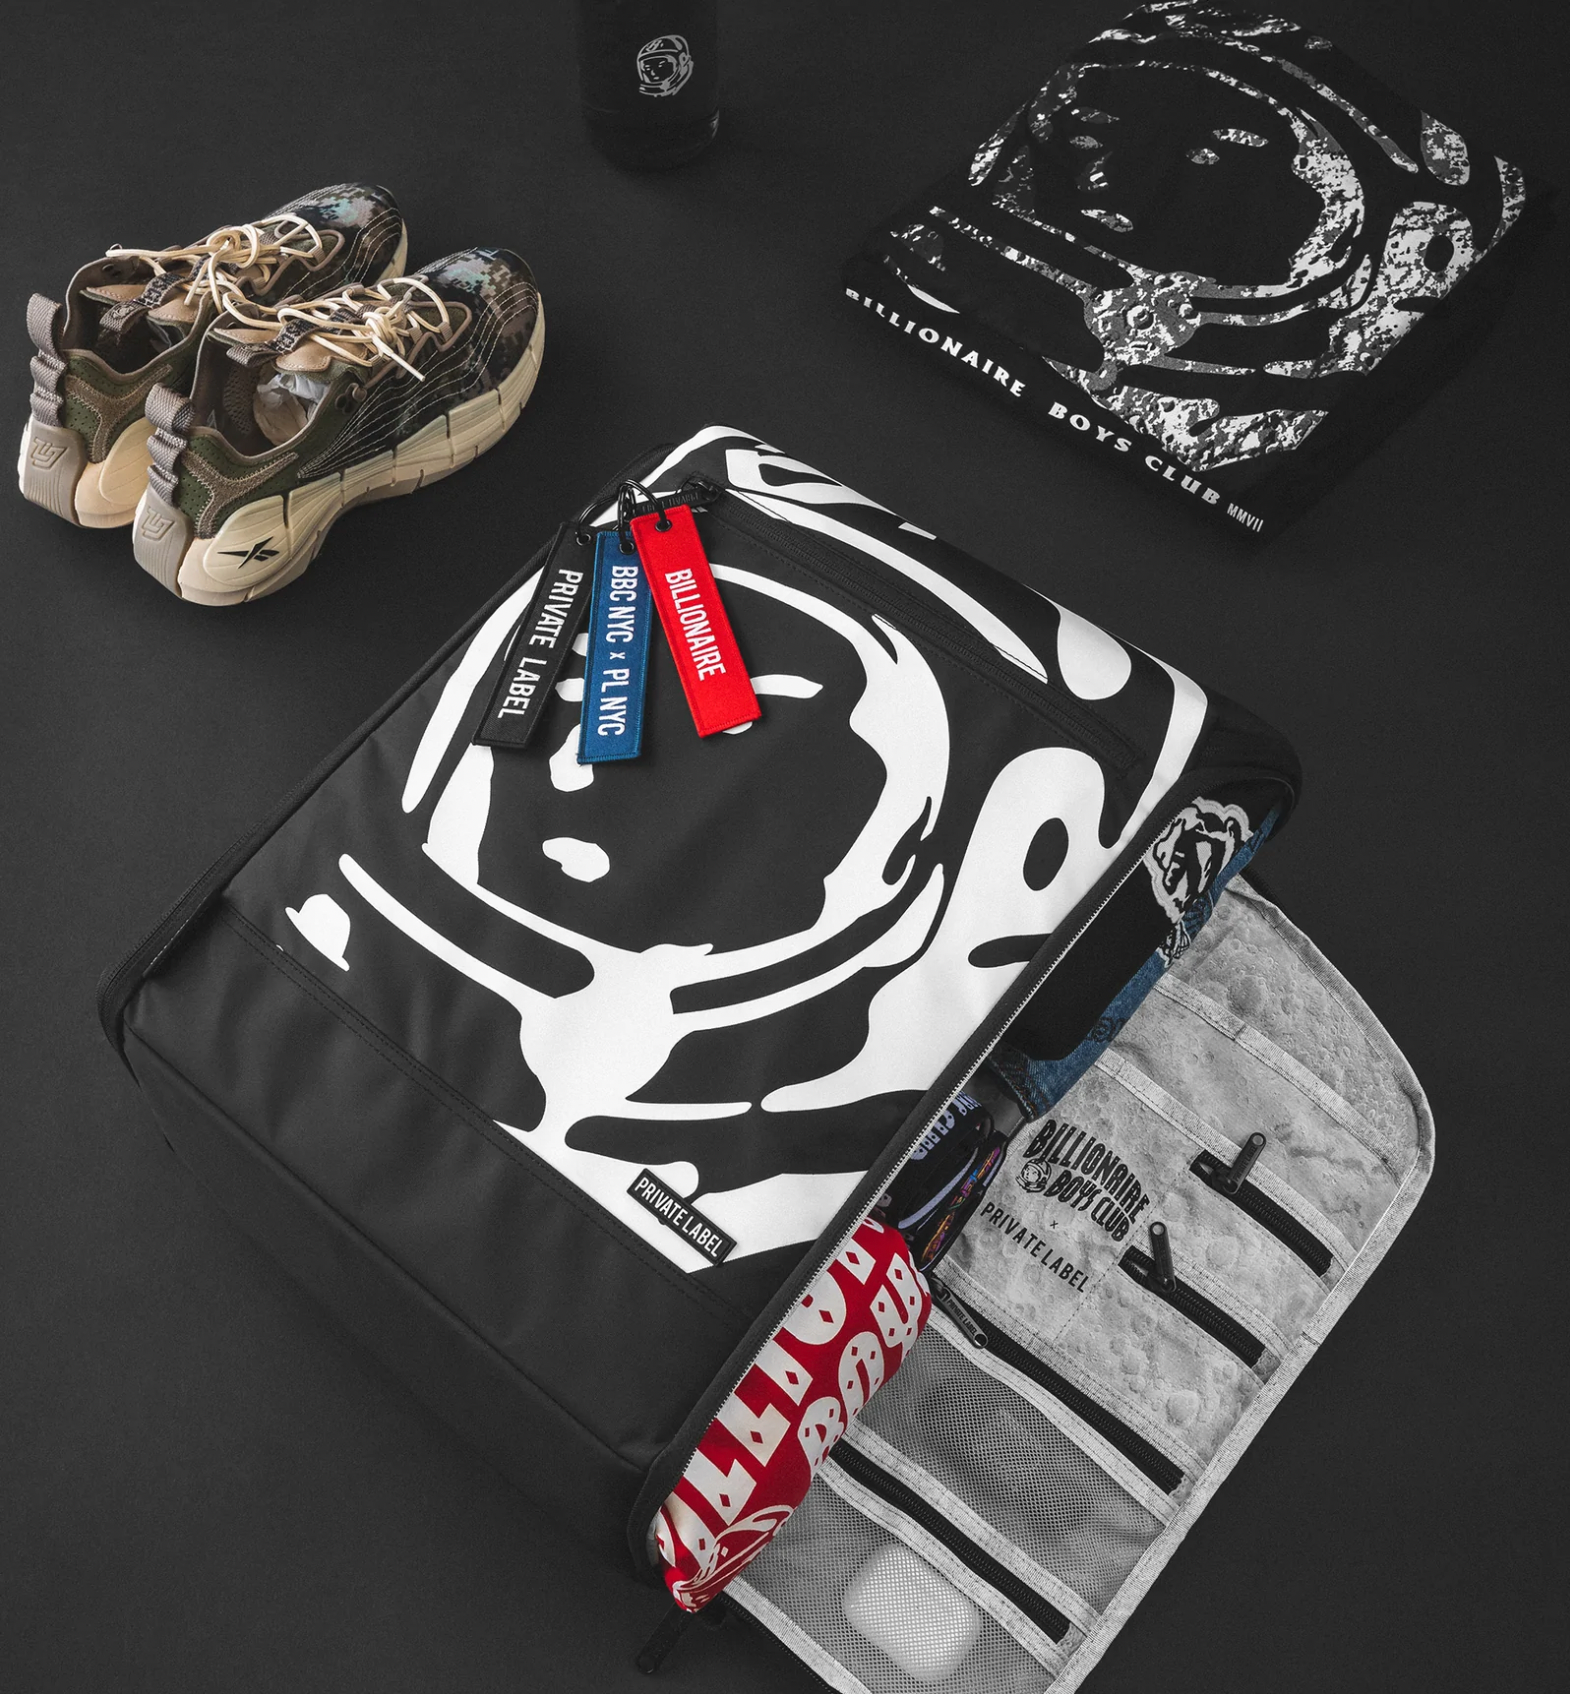 Billionaire Boys Club x Private Label NYC Backpack 3M Reflective